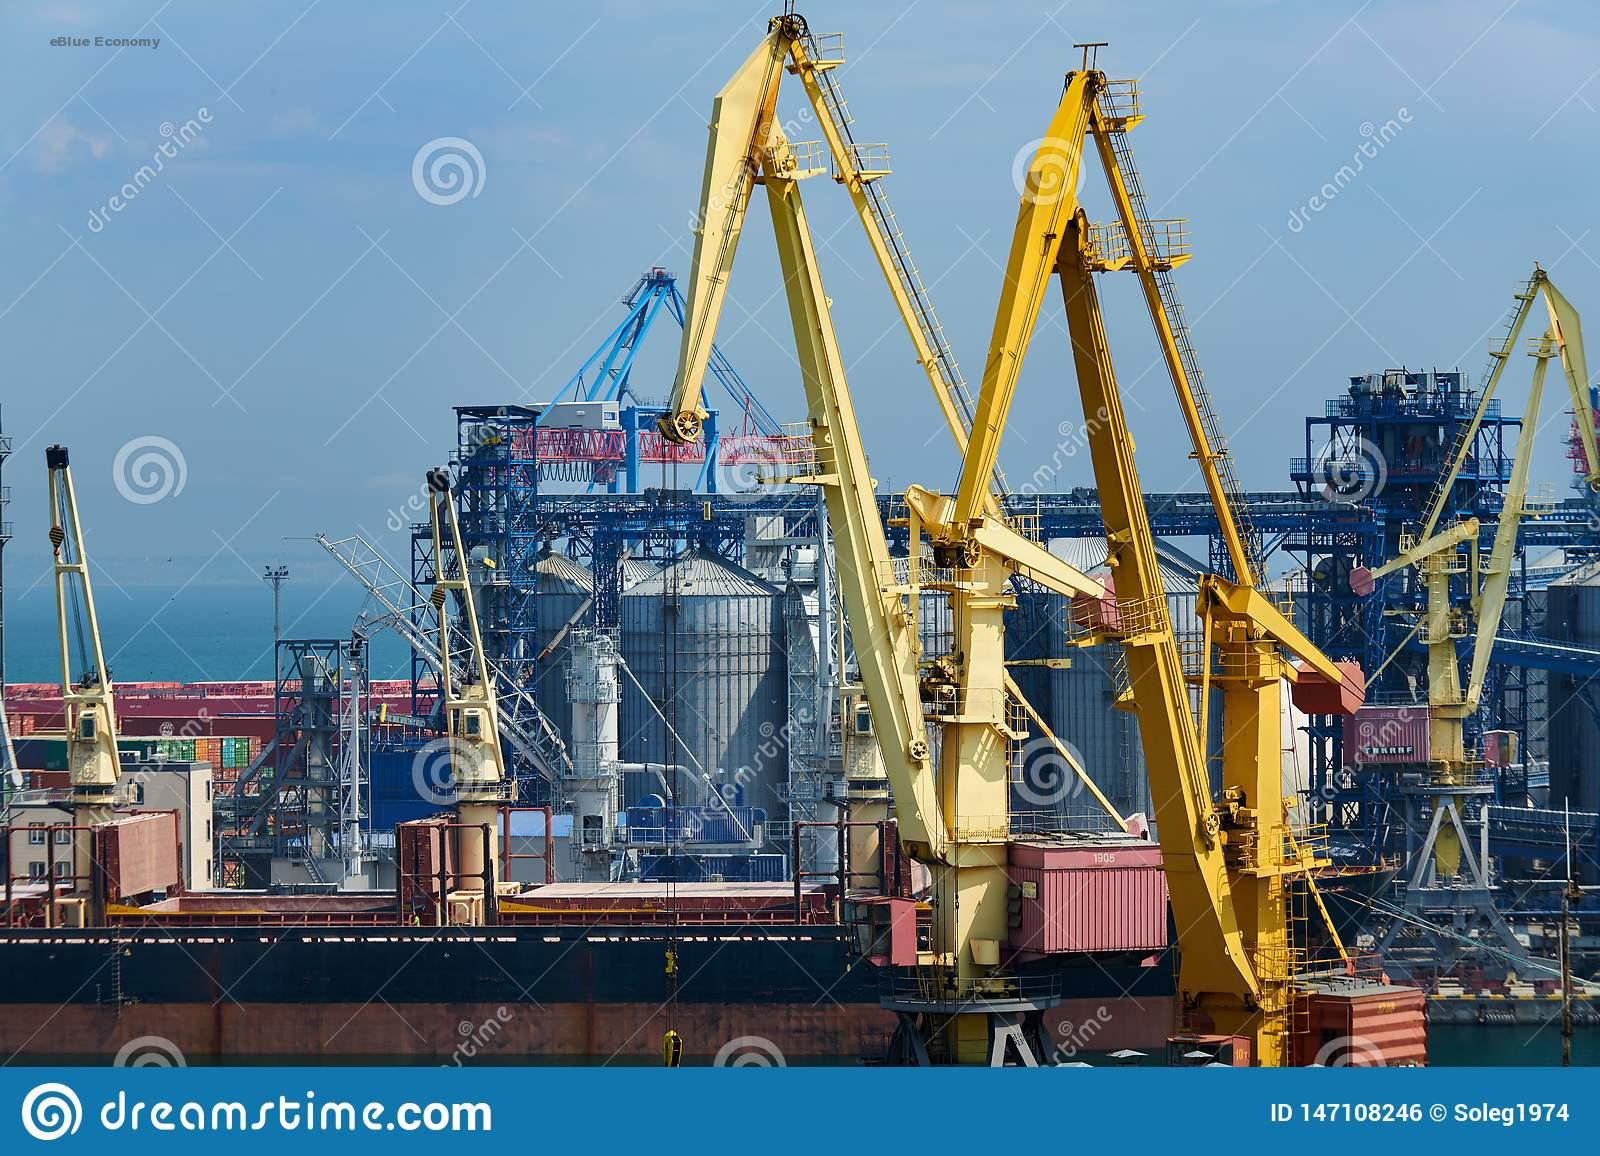 eBlue_economy_ DP World TIS Pivdennyi container terminal in Ukraine shows good results in the first 12 months